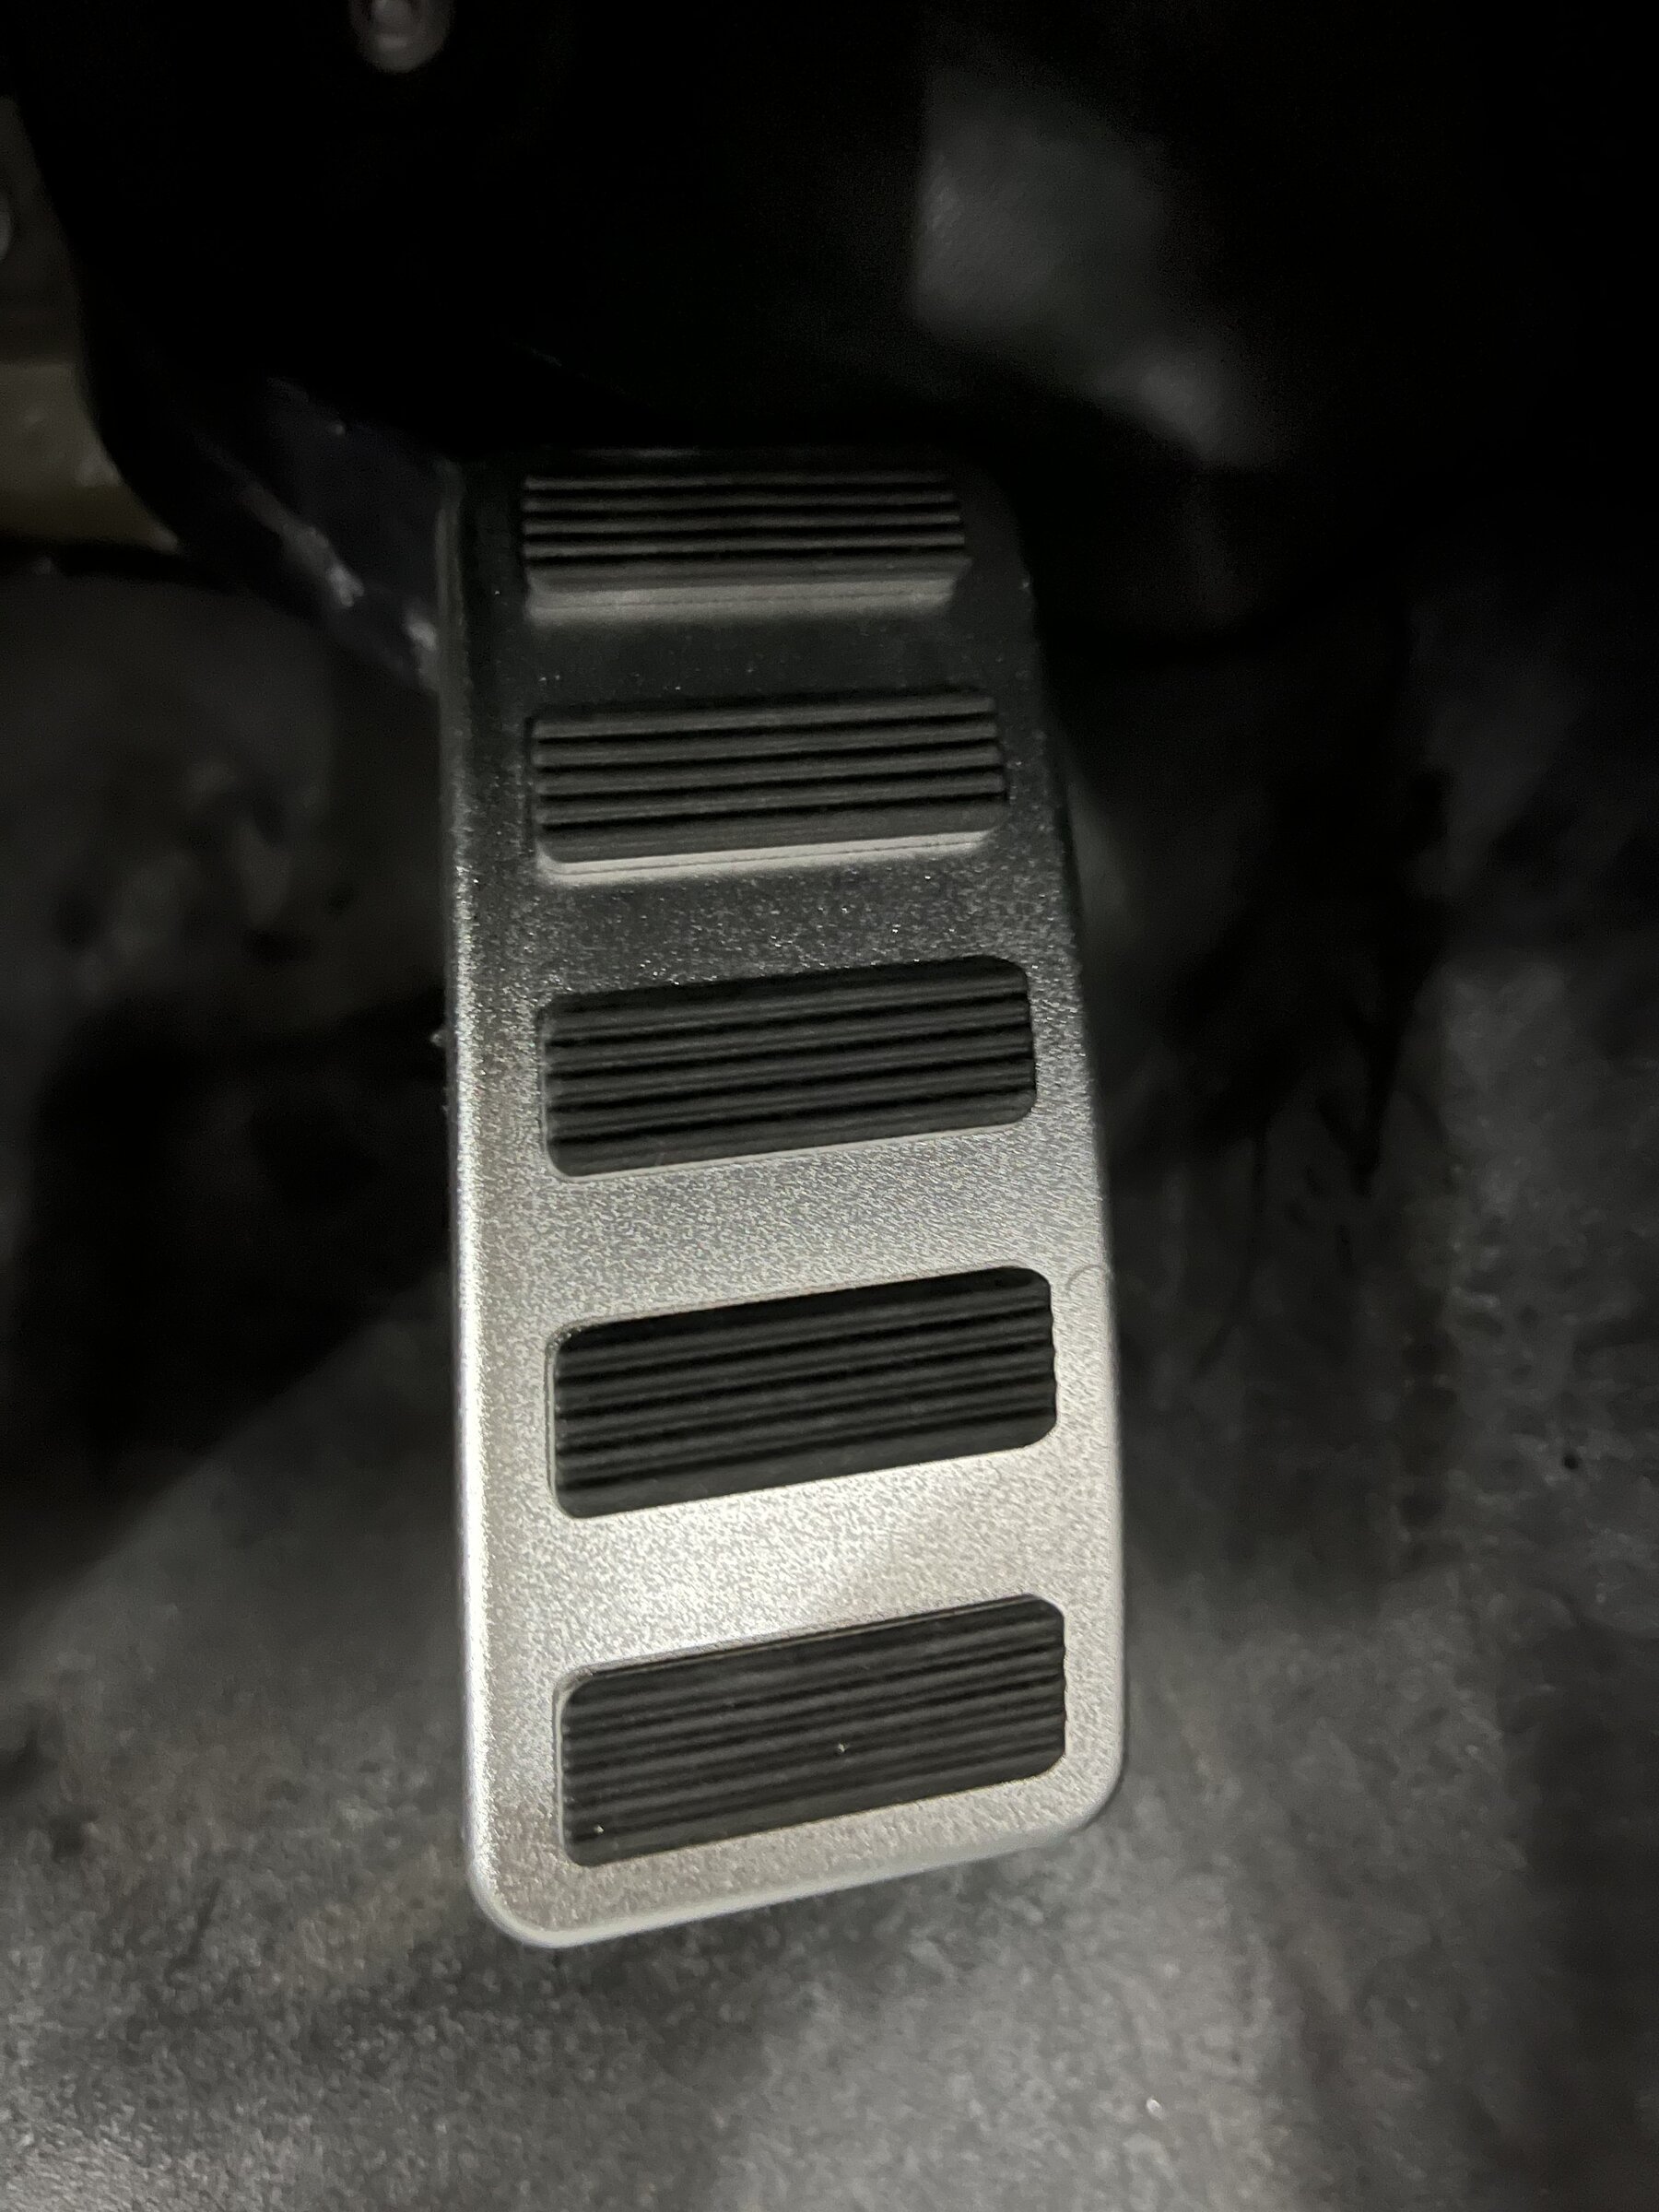 Ford Bronco Mabett Accelerator Brake Pedal Cover and Rest Pedal Cover & Volume Air Conditioner Knob Control Panel Cover Coming Soon! lQDPDhtGfOXzYSrNC9DND8Cw8-E4EFtp_SACRCkYUACrAA_4032_3024